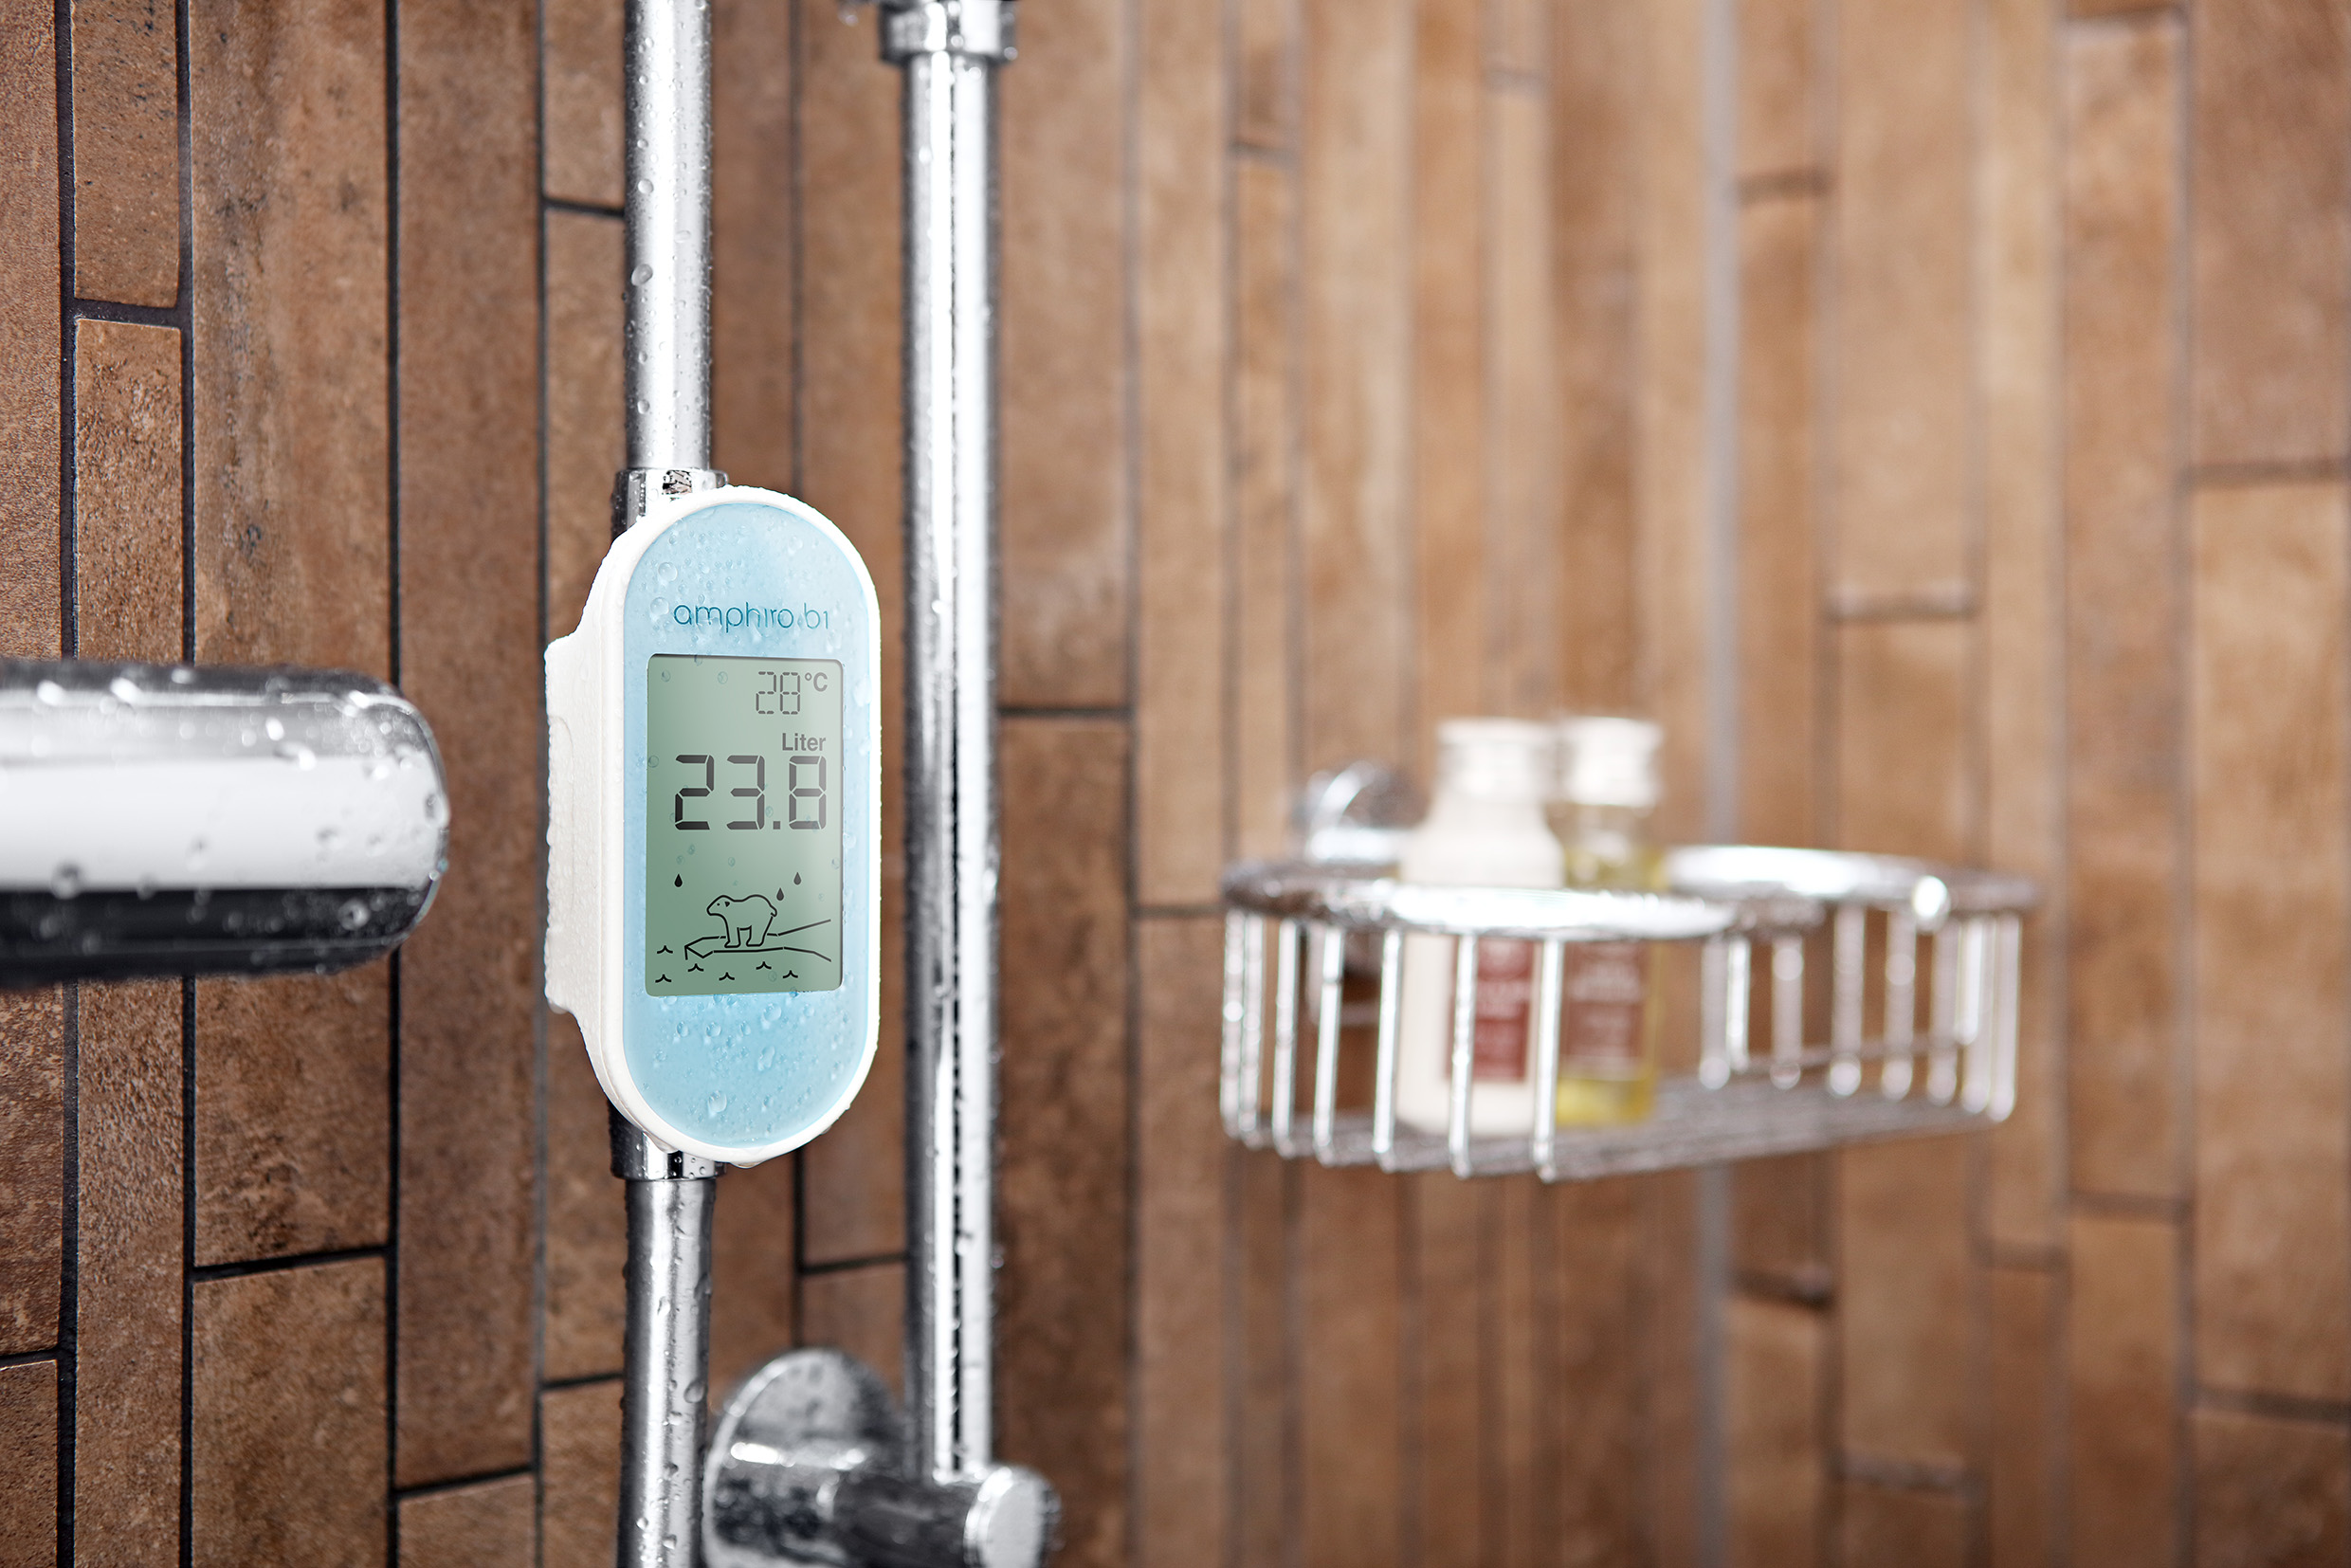 Image of smart shower monitor indicating water temperature and consumption